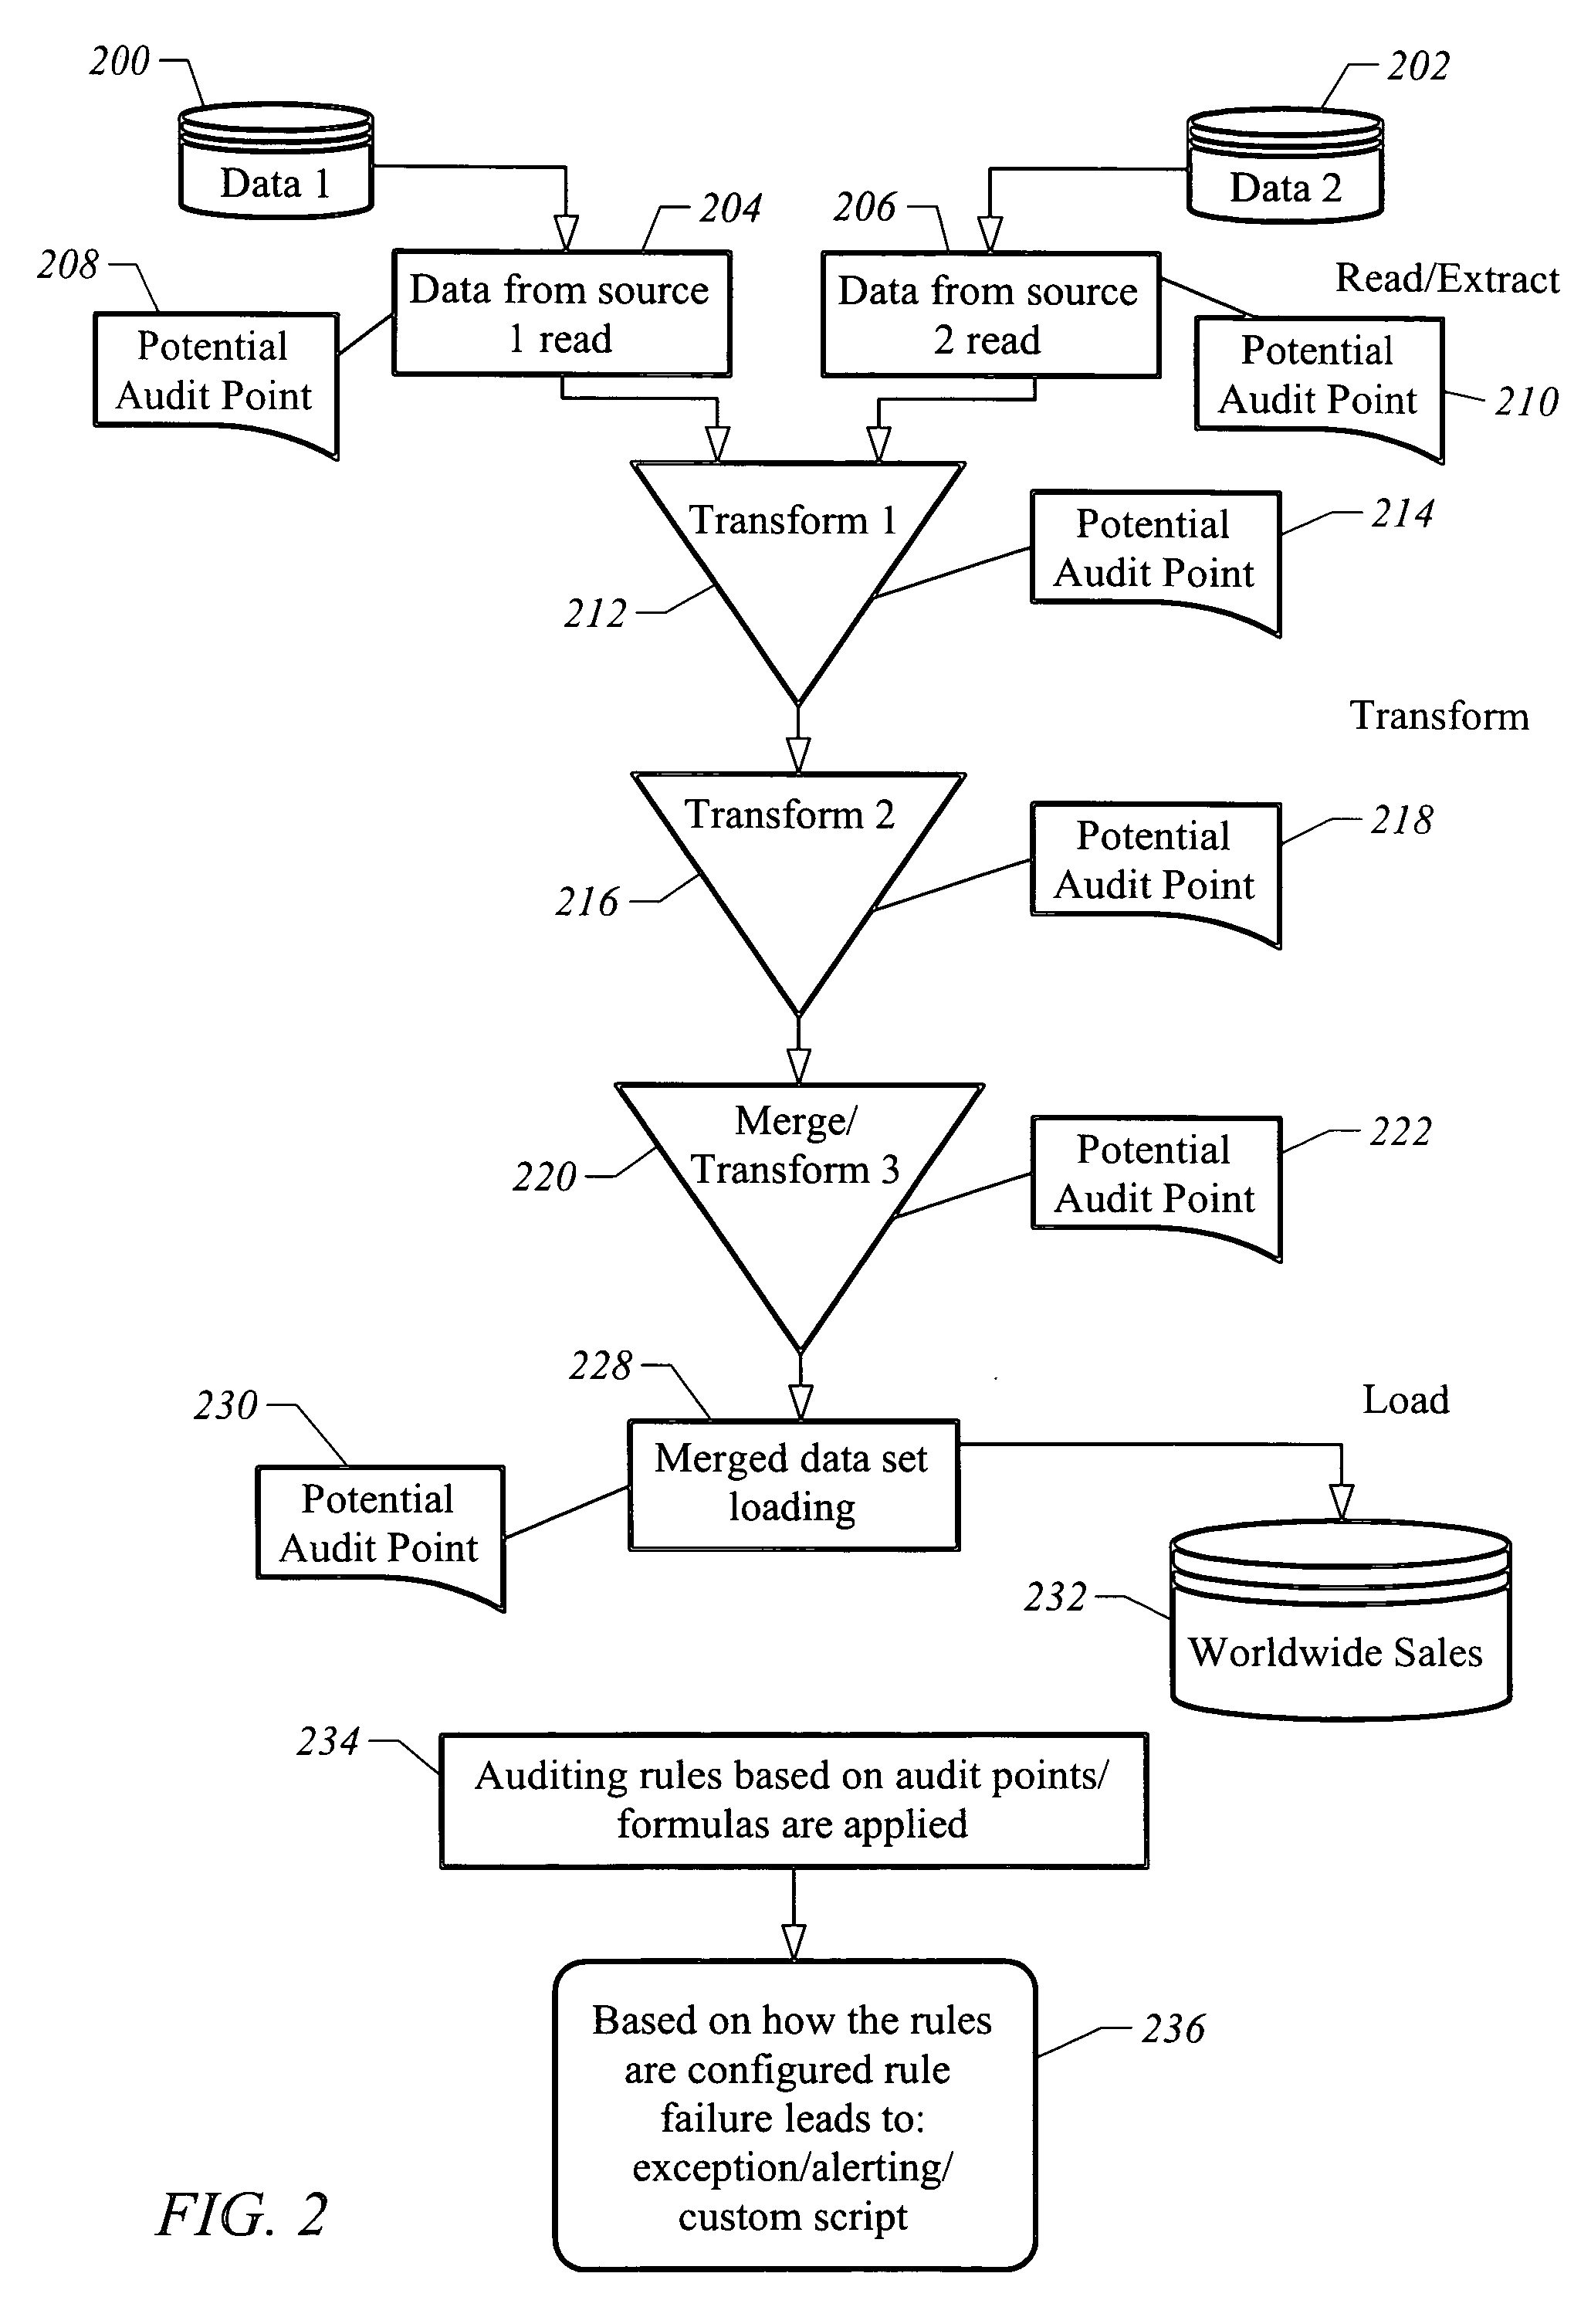 Apparatus and method for dynamically auditing data migration to produce metadata